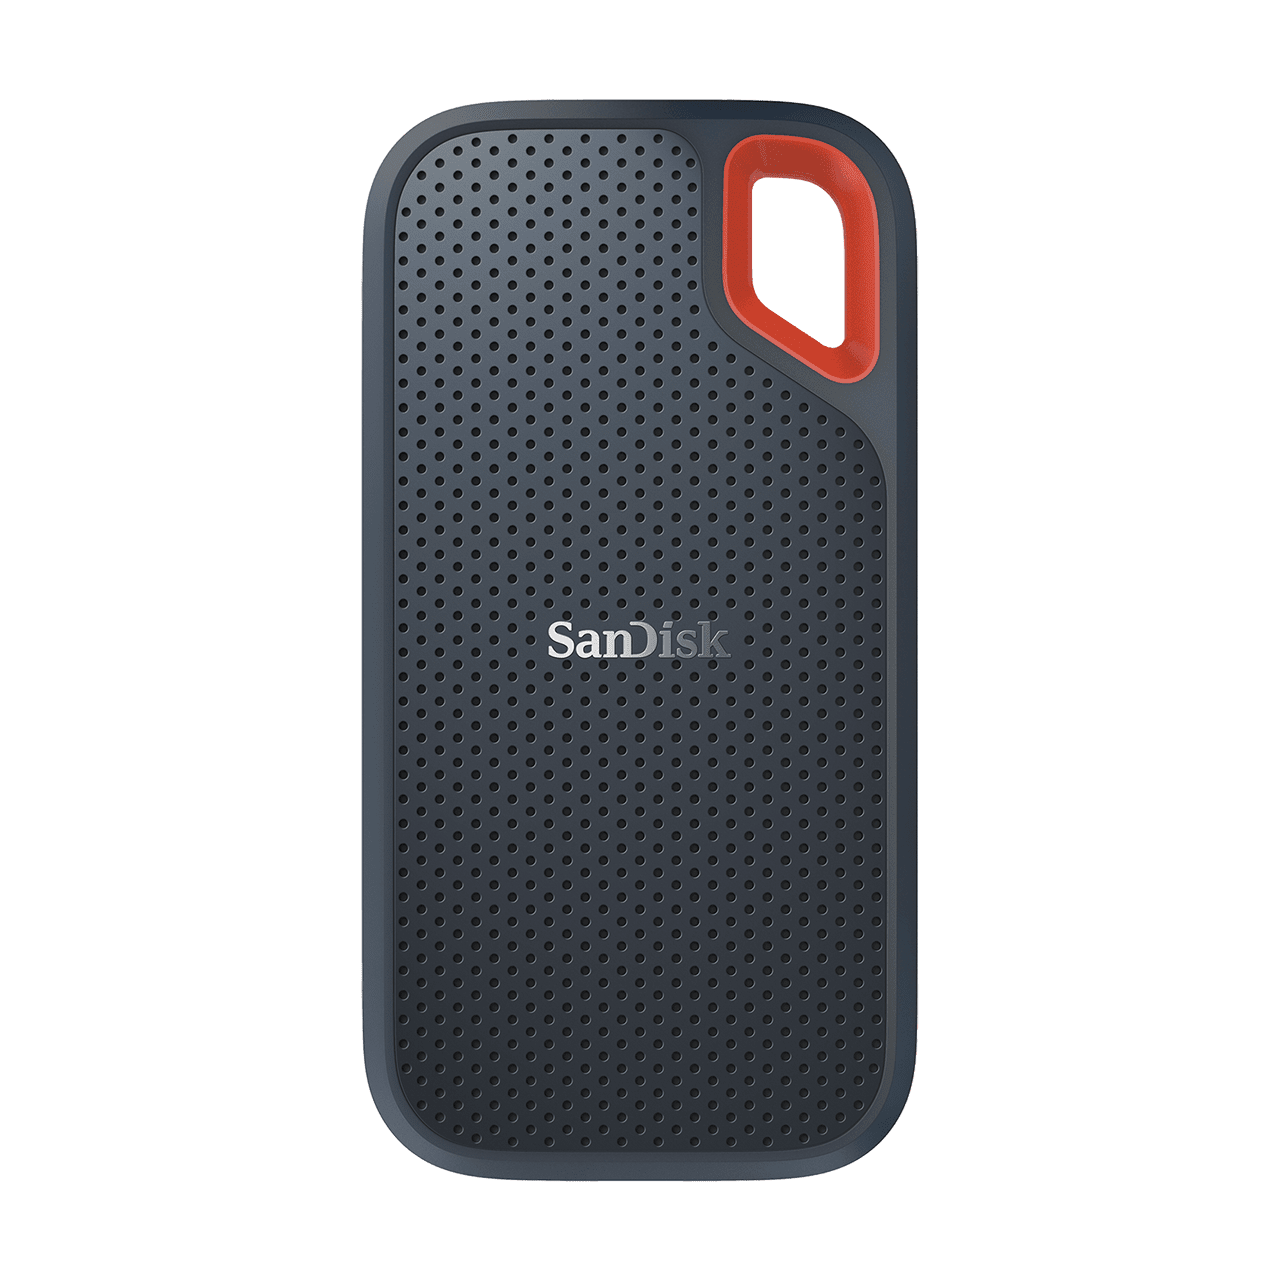 Внешний диск SSD Sandisk Extreme Portable External, 500ГБ orico external hard drives 1tb 500gb 250gb mini portable ssd type c 540m s external ssd solid state drives disk for laptop